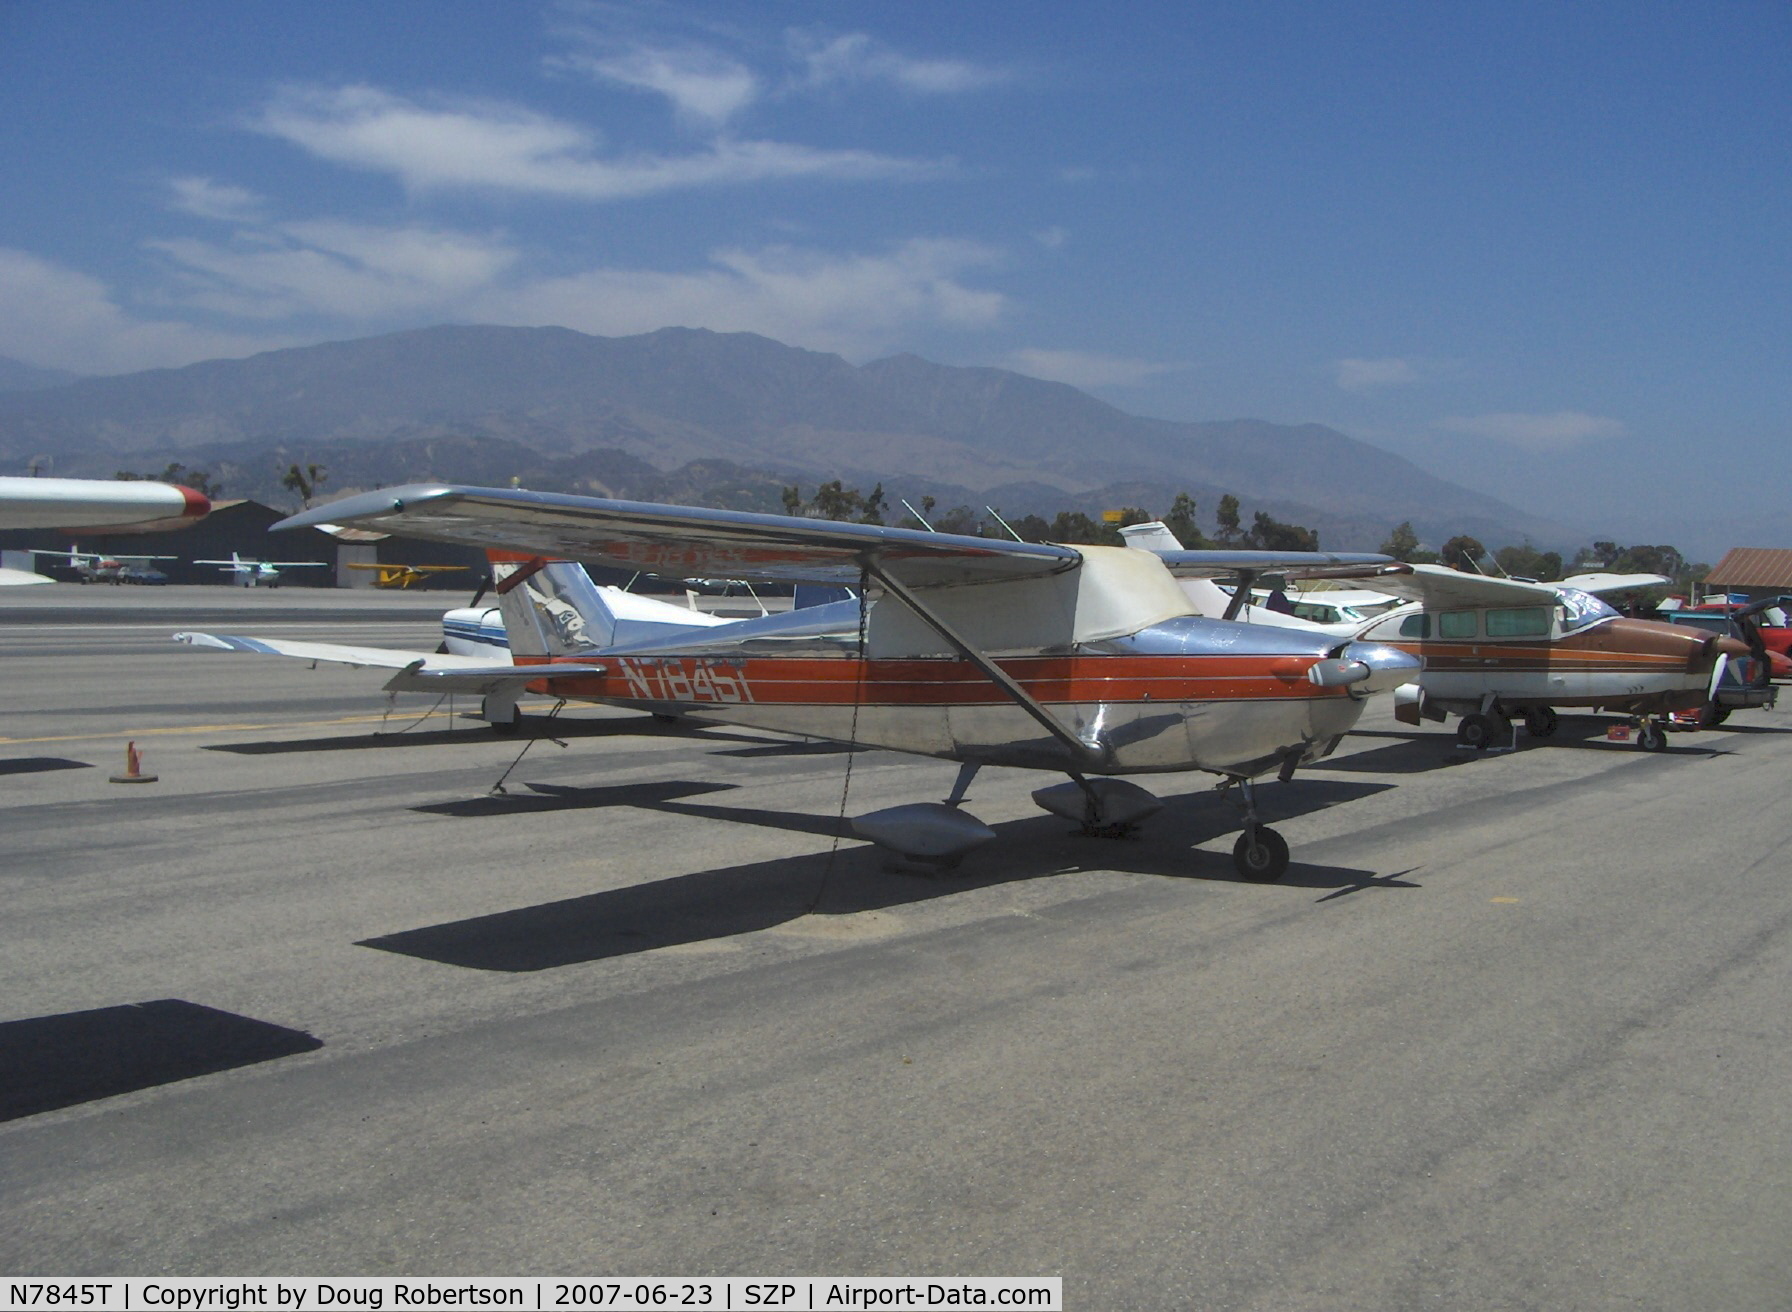 N7845T, 1960 Cessna 172A C/N 47445, 1960 Cessna 172A, Continental O-300 145 Hp, highly polished aluminum